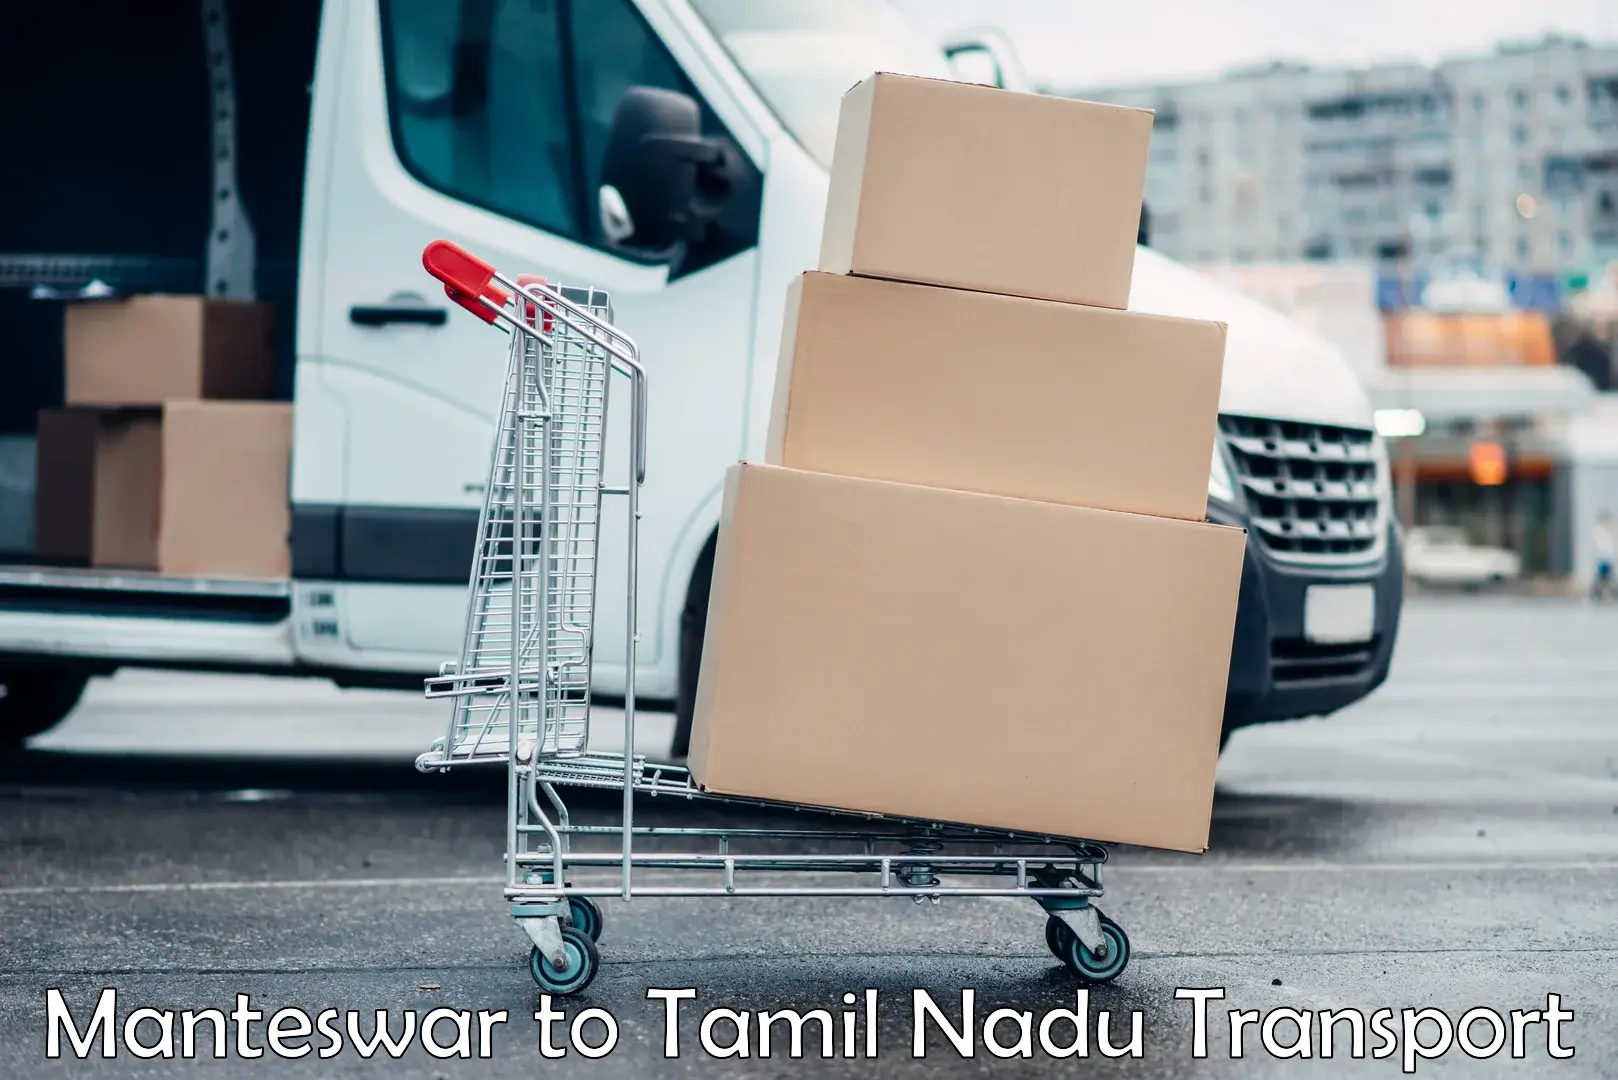 Commercial transport service Manteswar to Vellore Institute of Technology